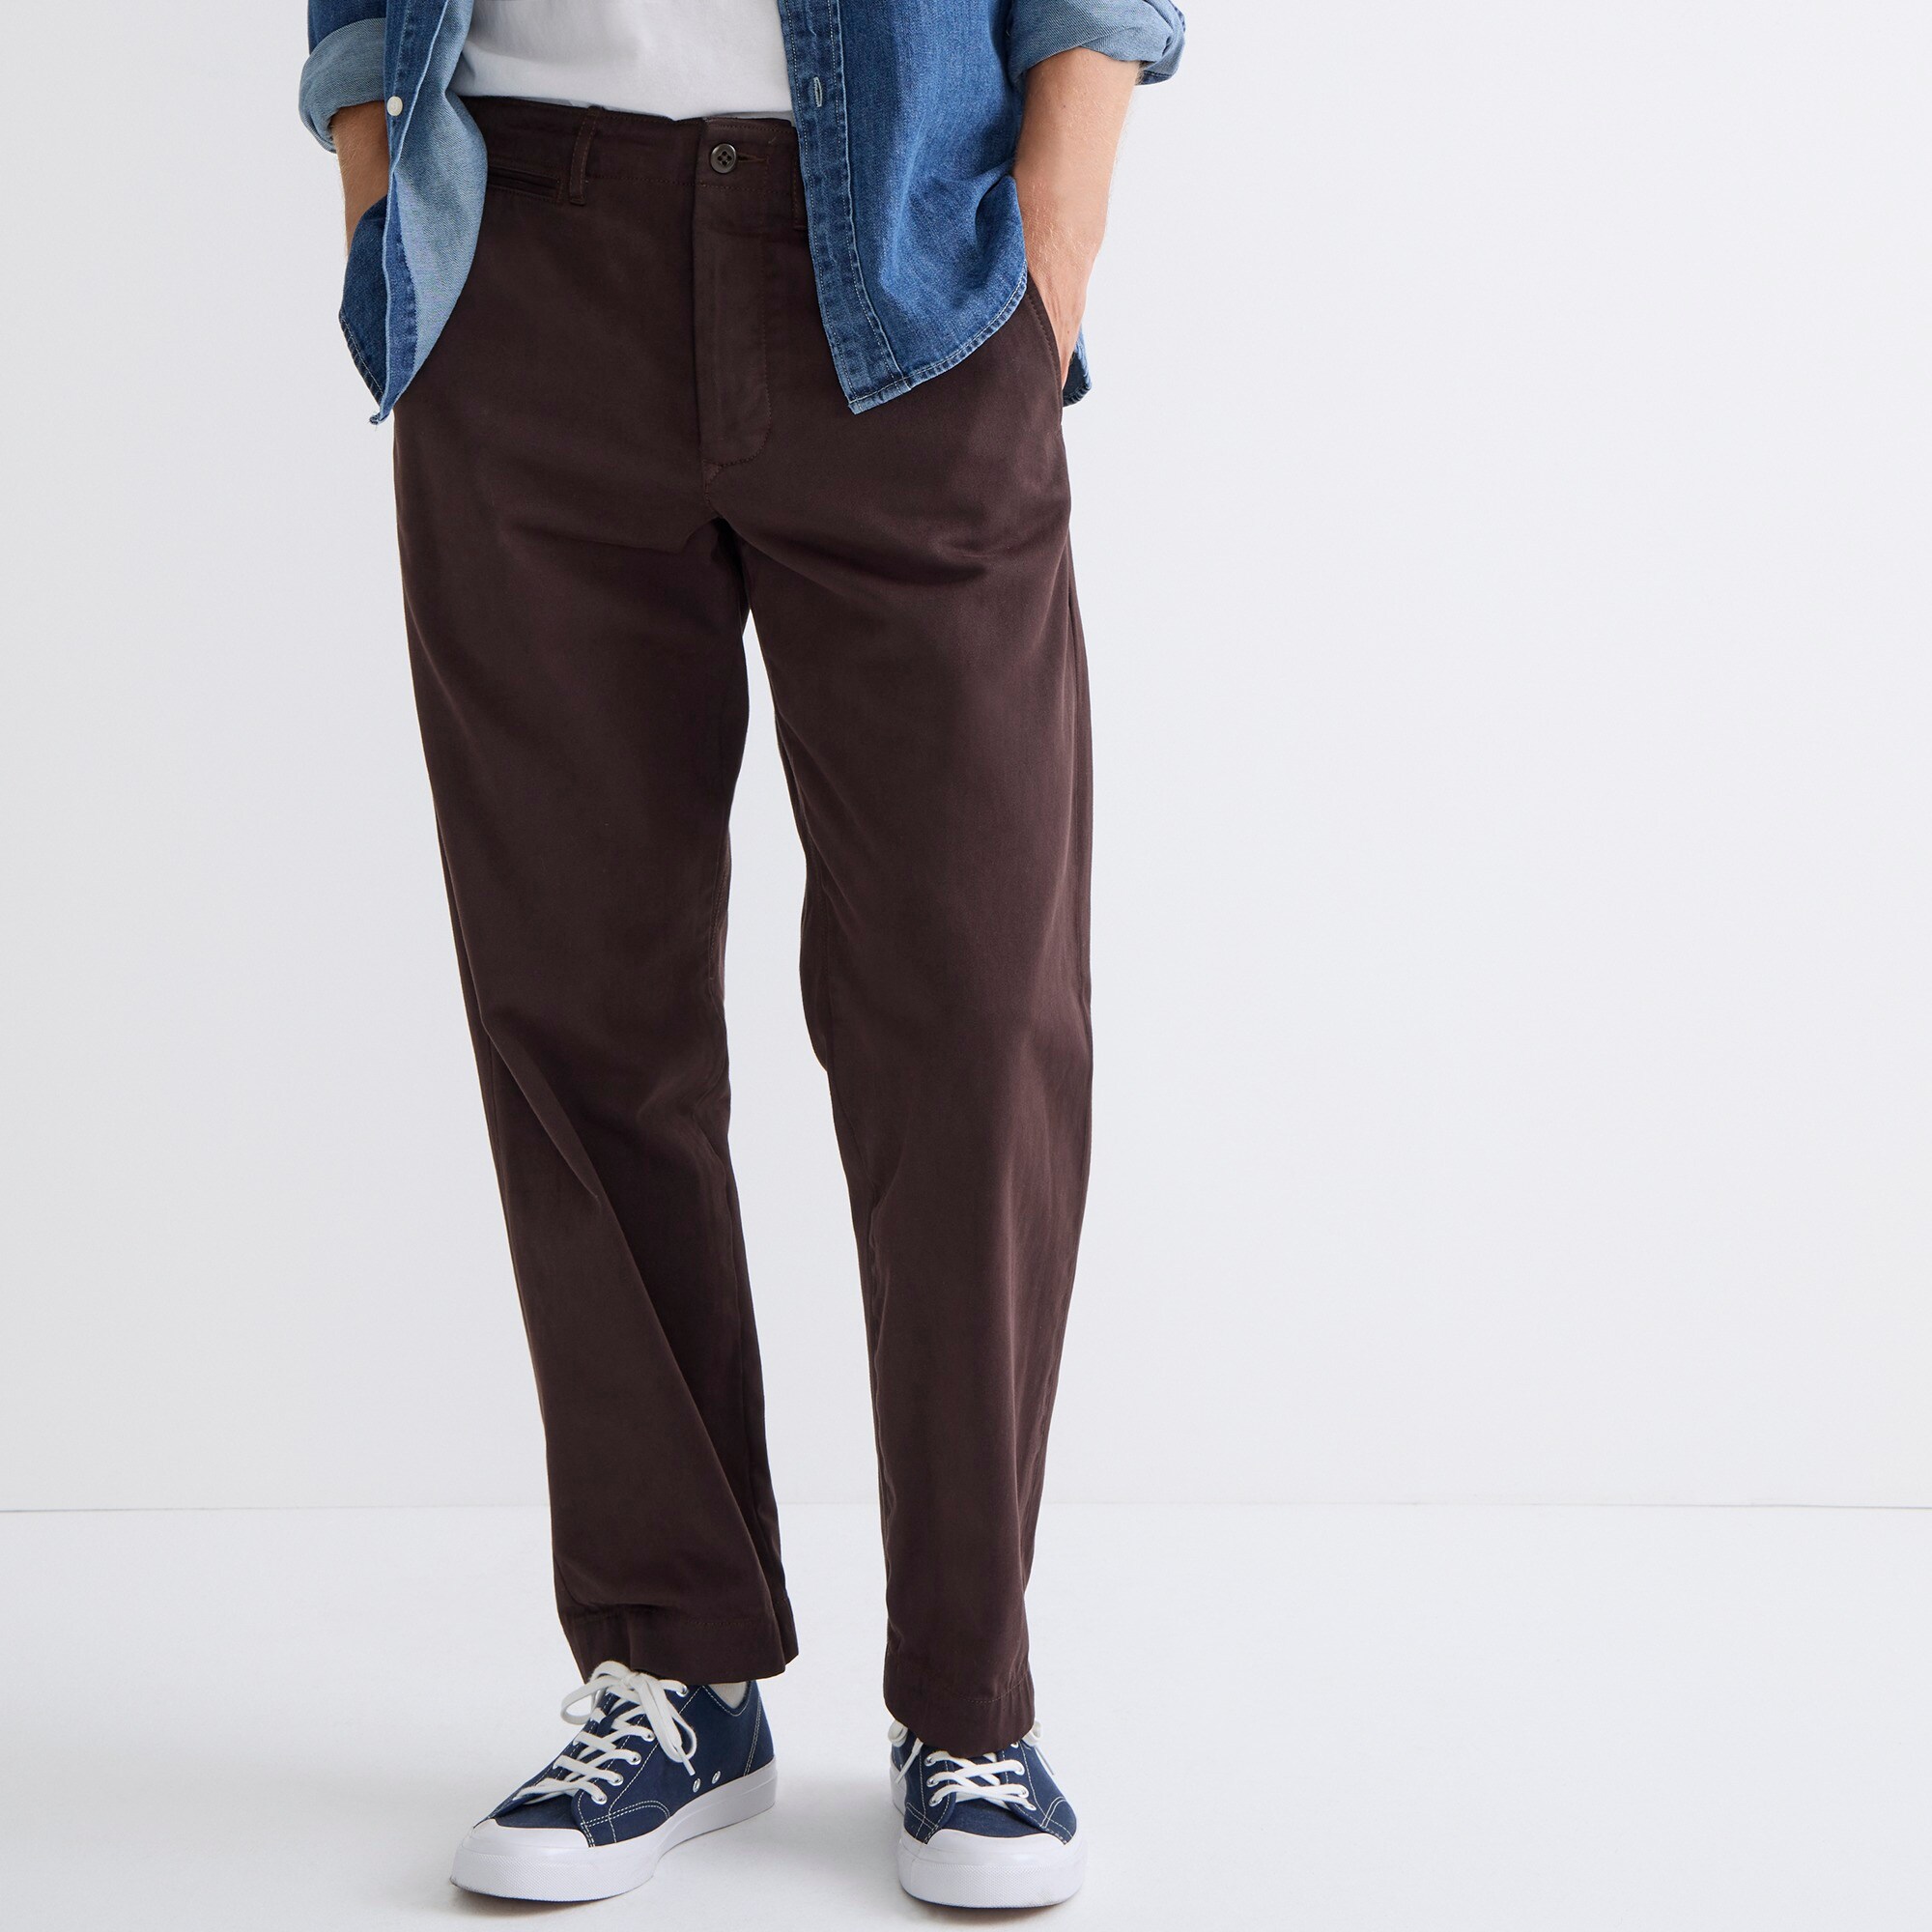  Wallace &amp; Barnes selvedge officer chino pant